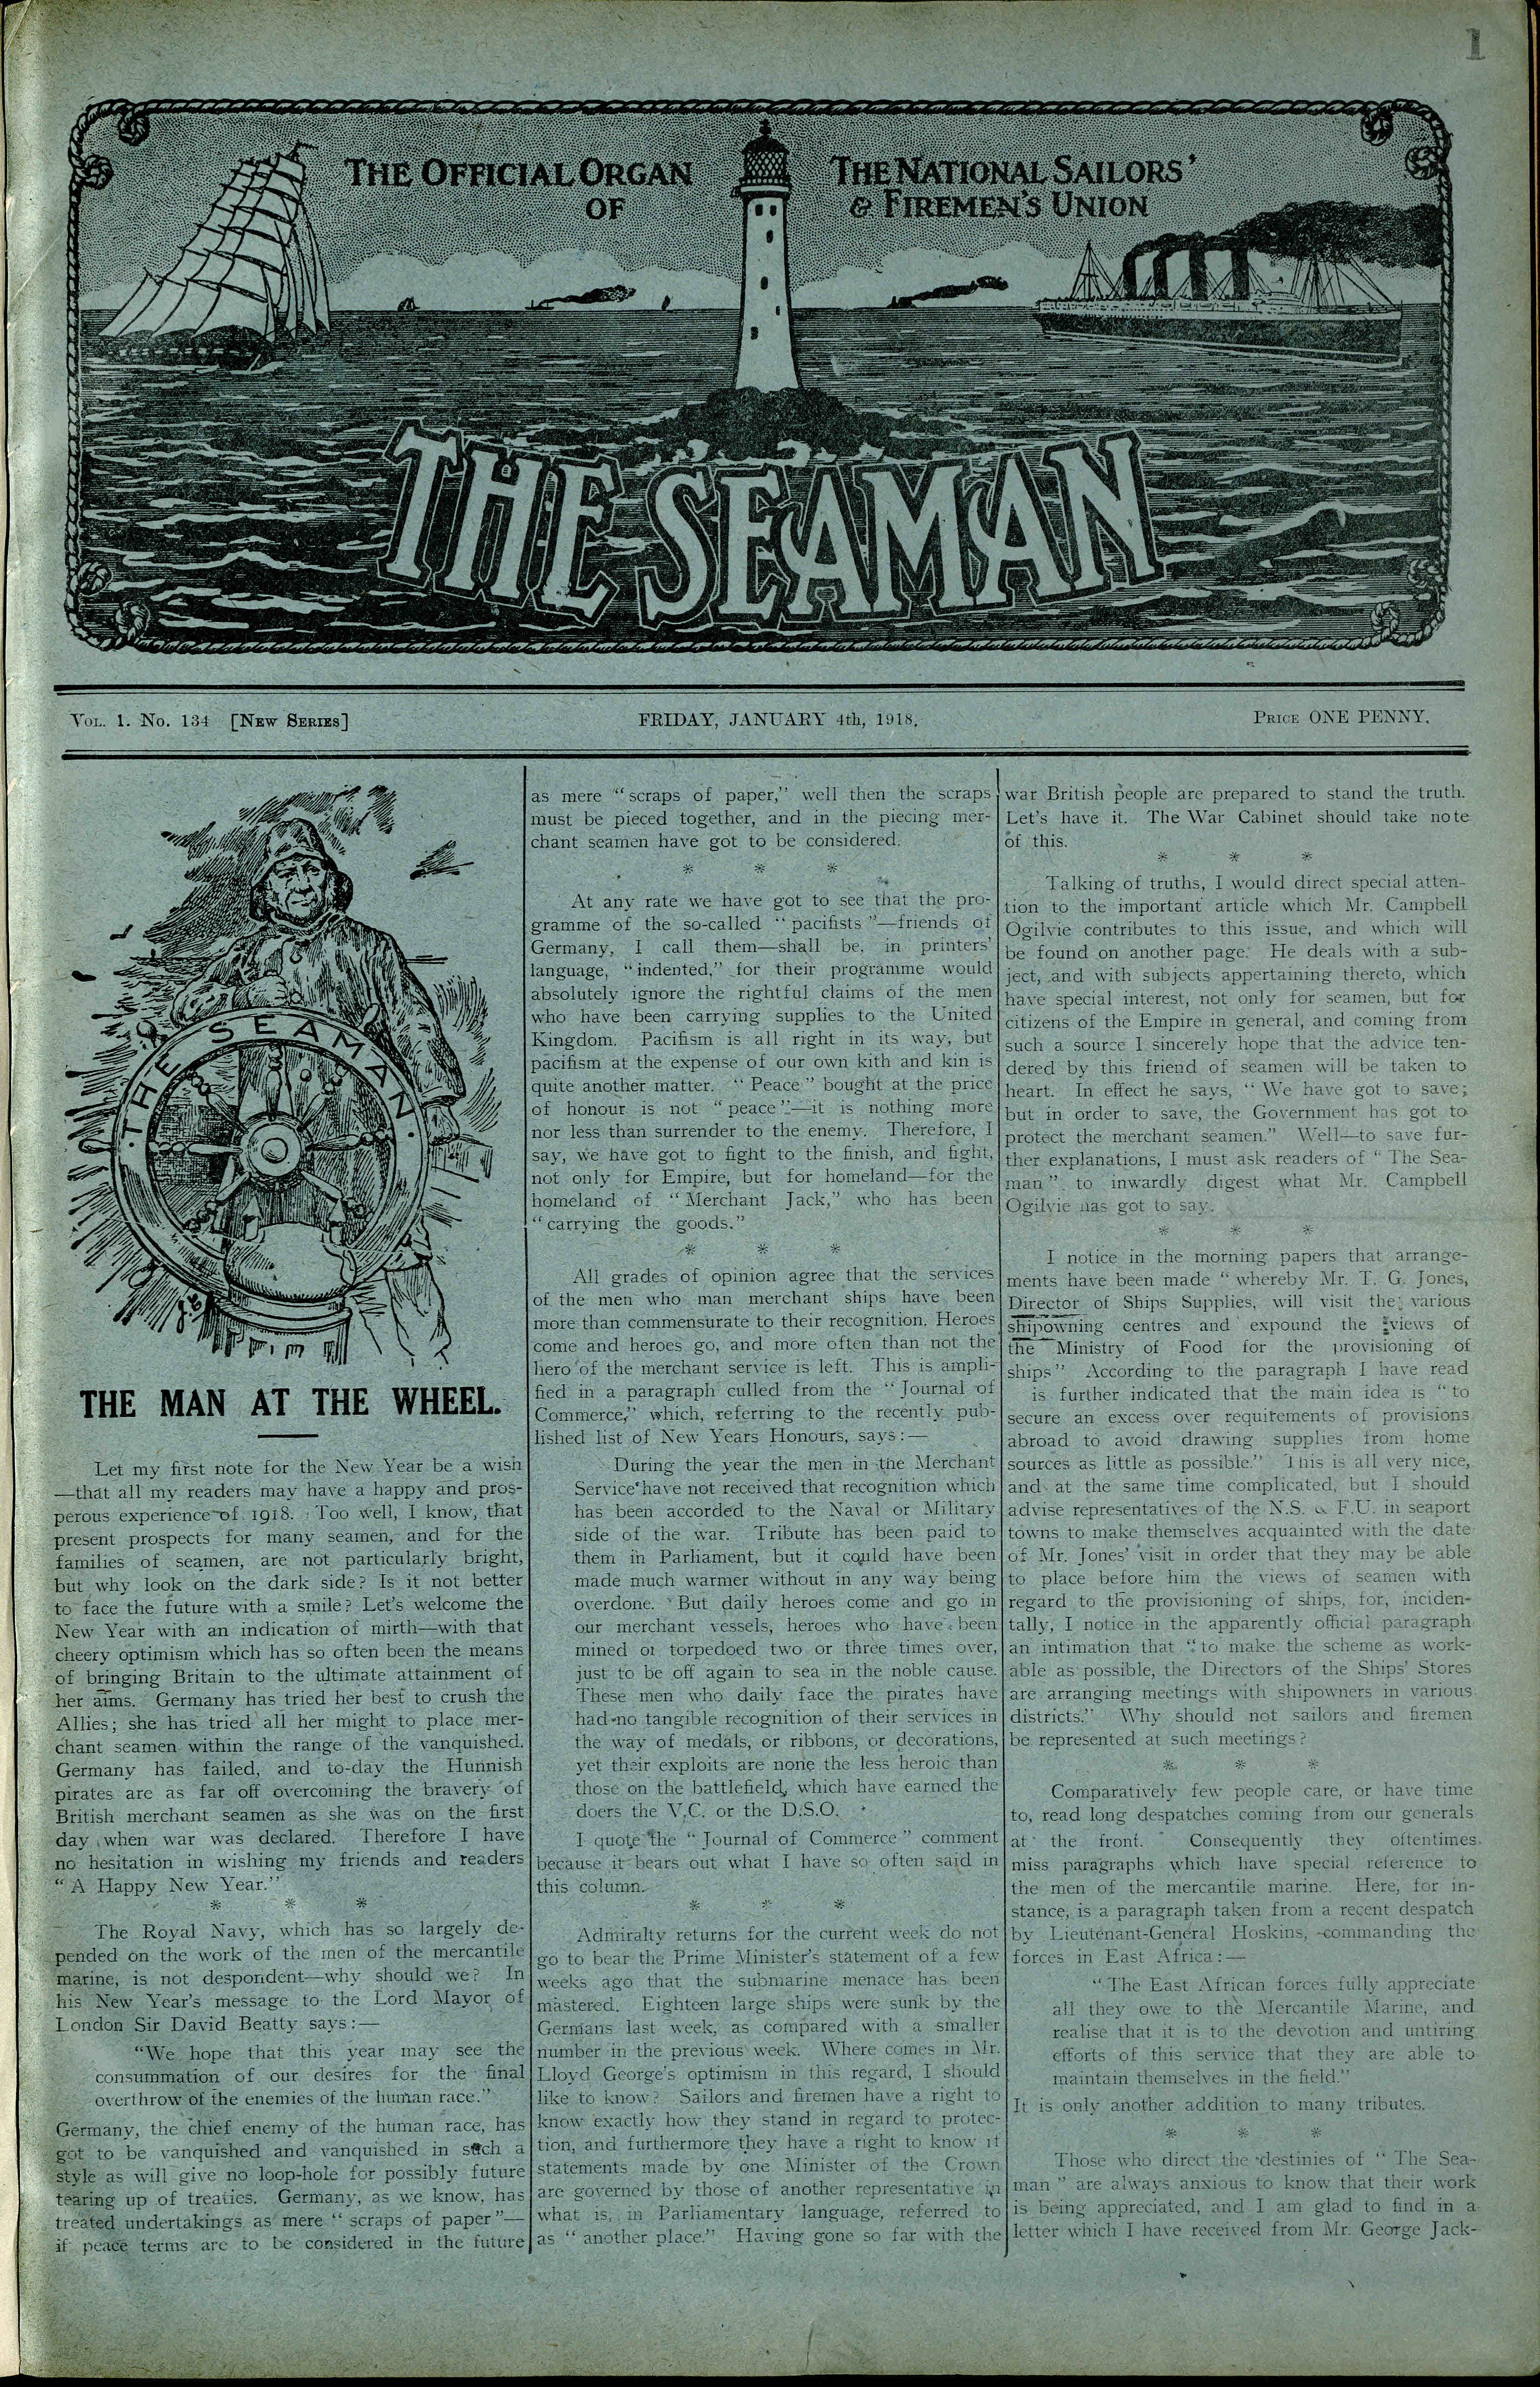 Front page of The Seaman, 4 Jan 1918